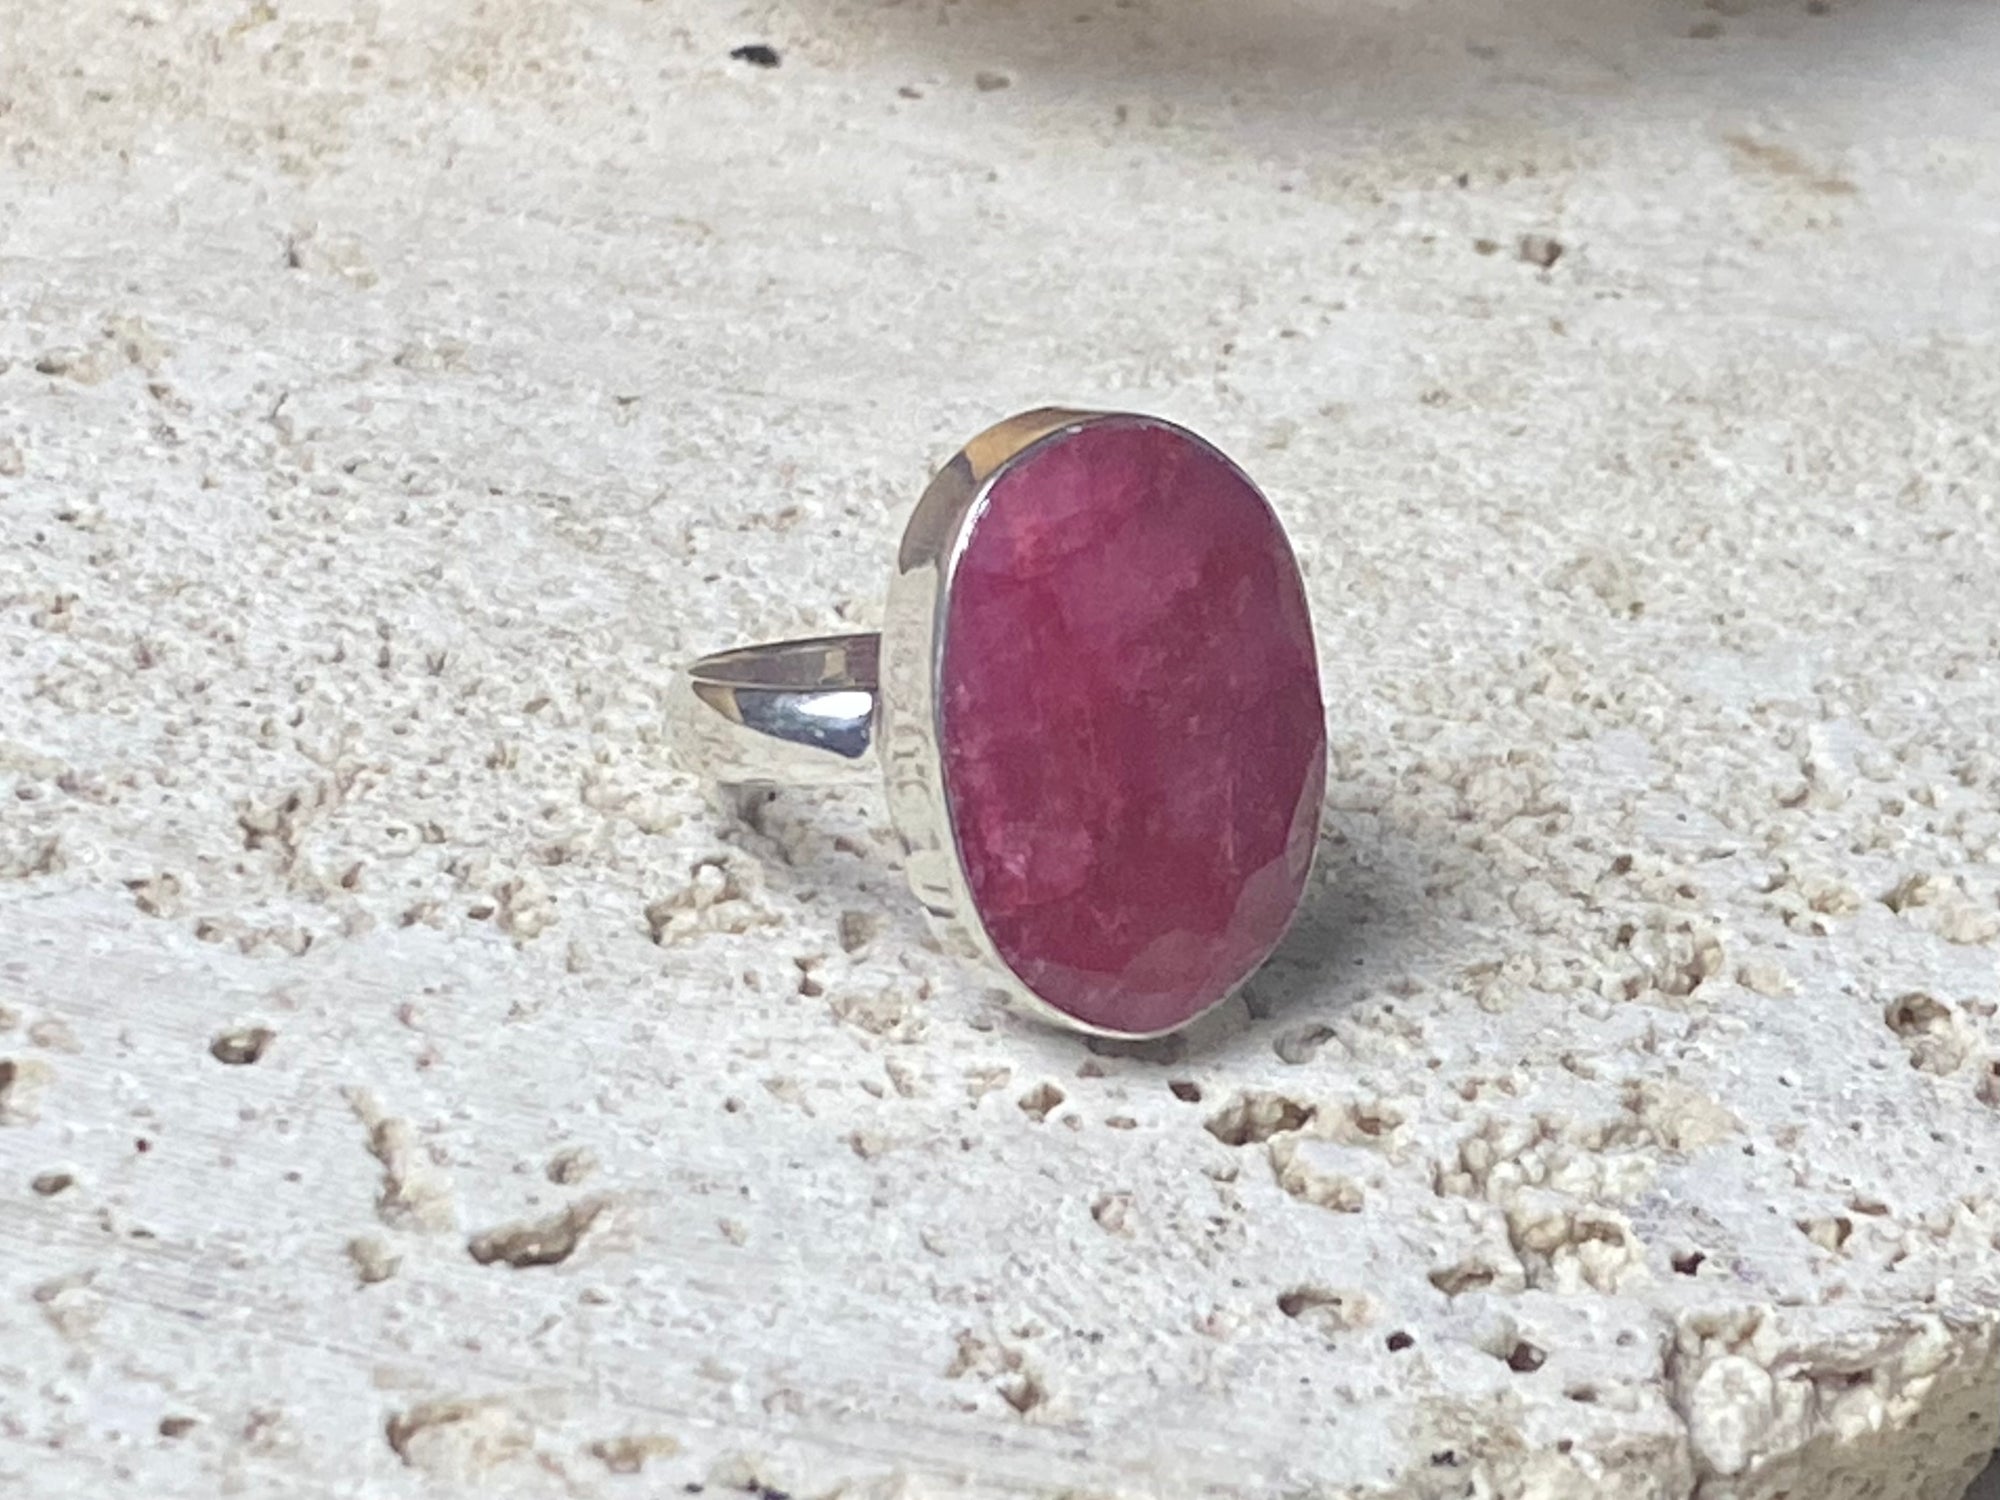  Our large facet cut ruby is set in a simple sterling silver bezel to show off the beauty and size of the stone. This is a statement ring that can be worn be either men or women.  Measurements:  Ruby 2 x 1.5 cm Size 8.5 | 18.75 mm